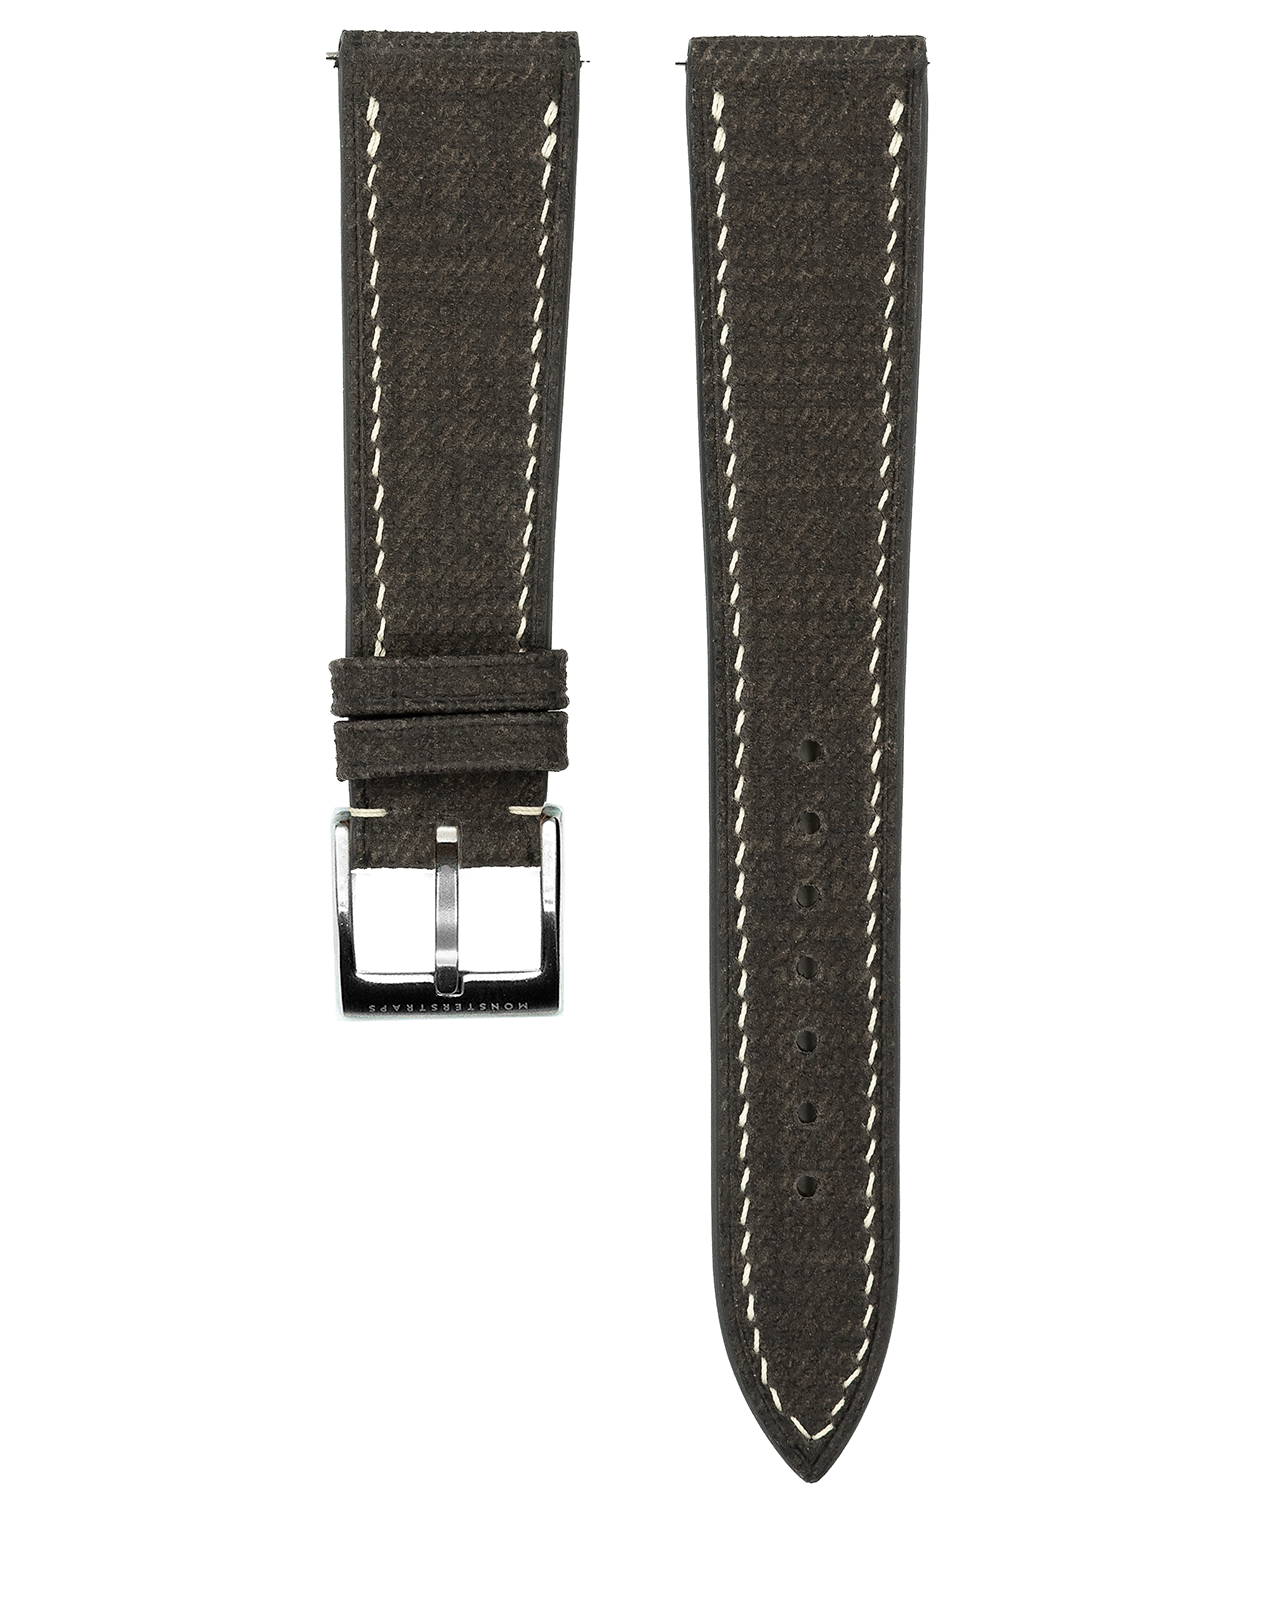 Fabric Leather Strap (Aged Wood)